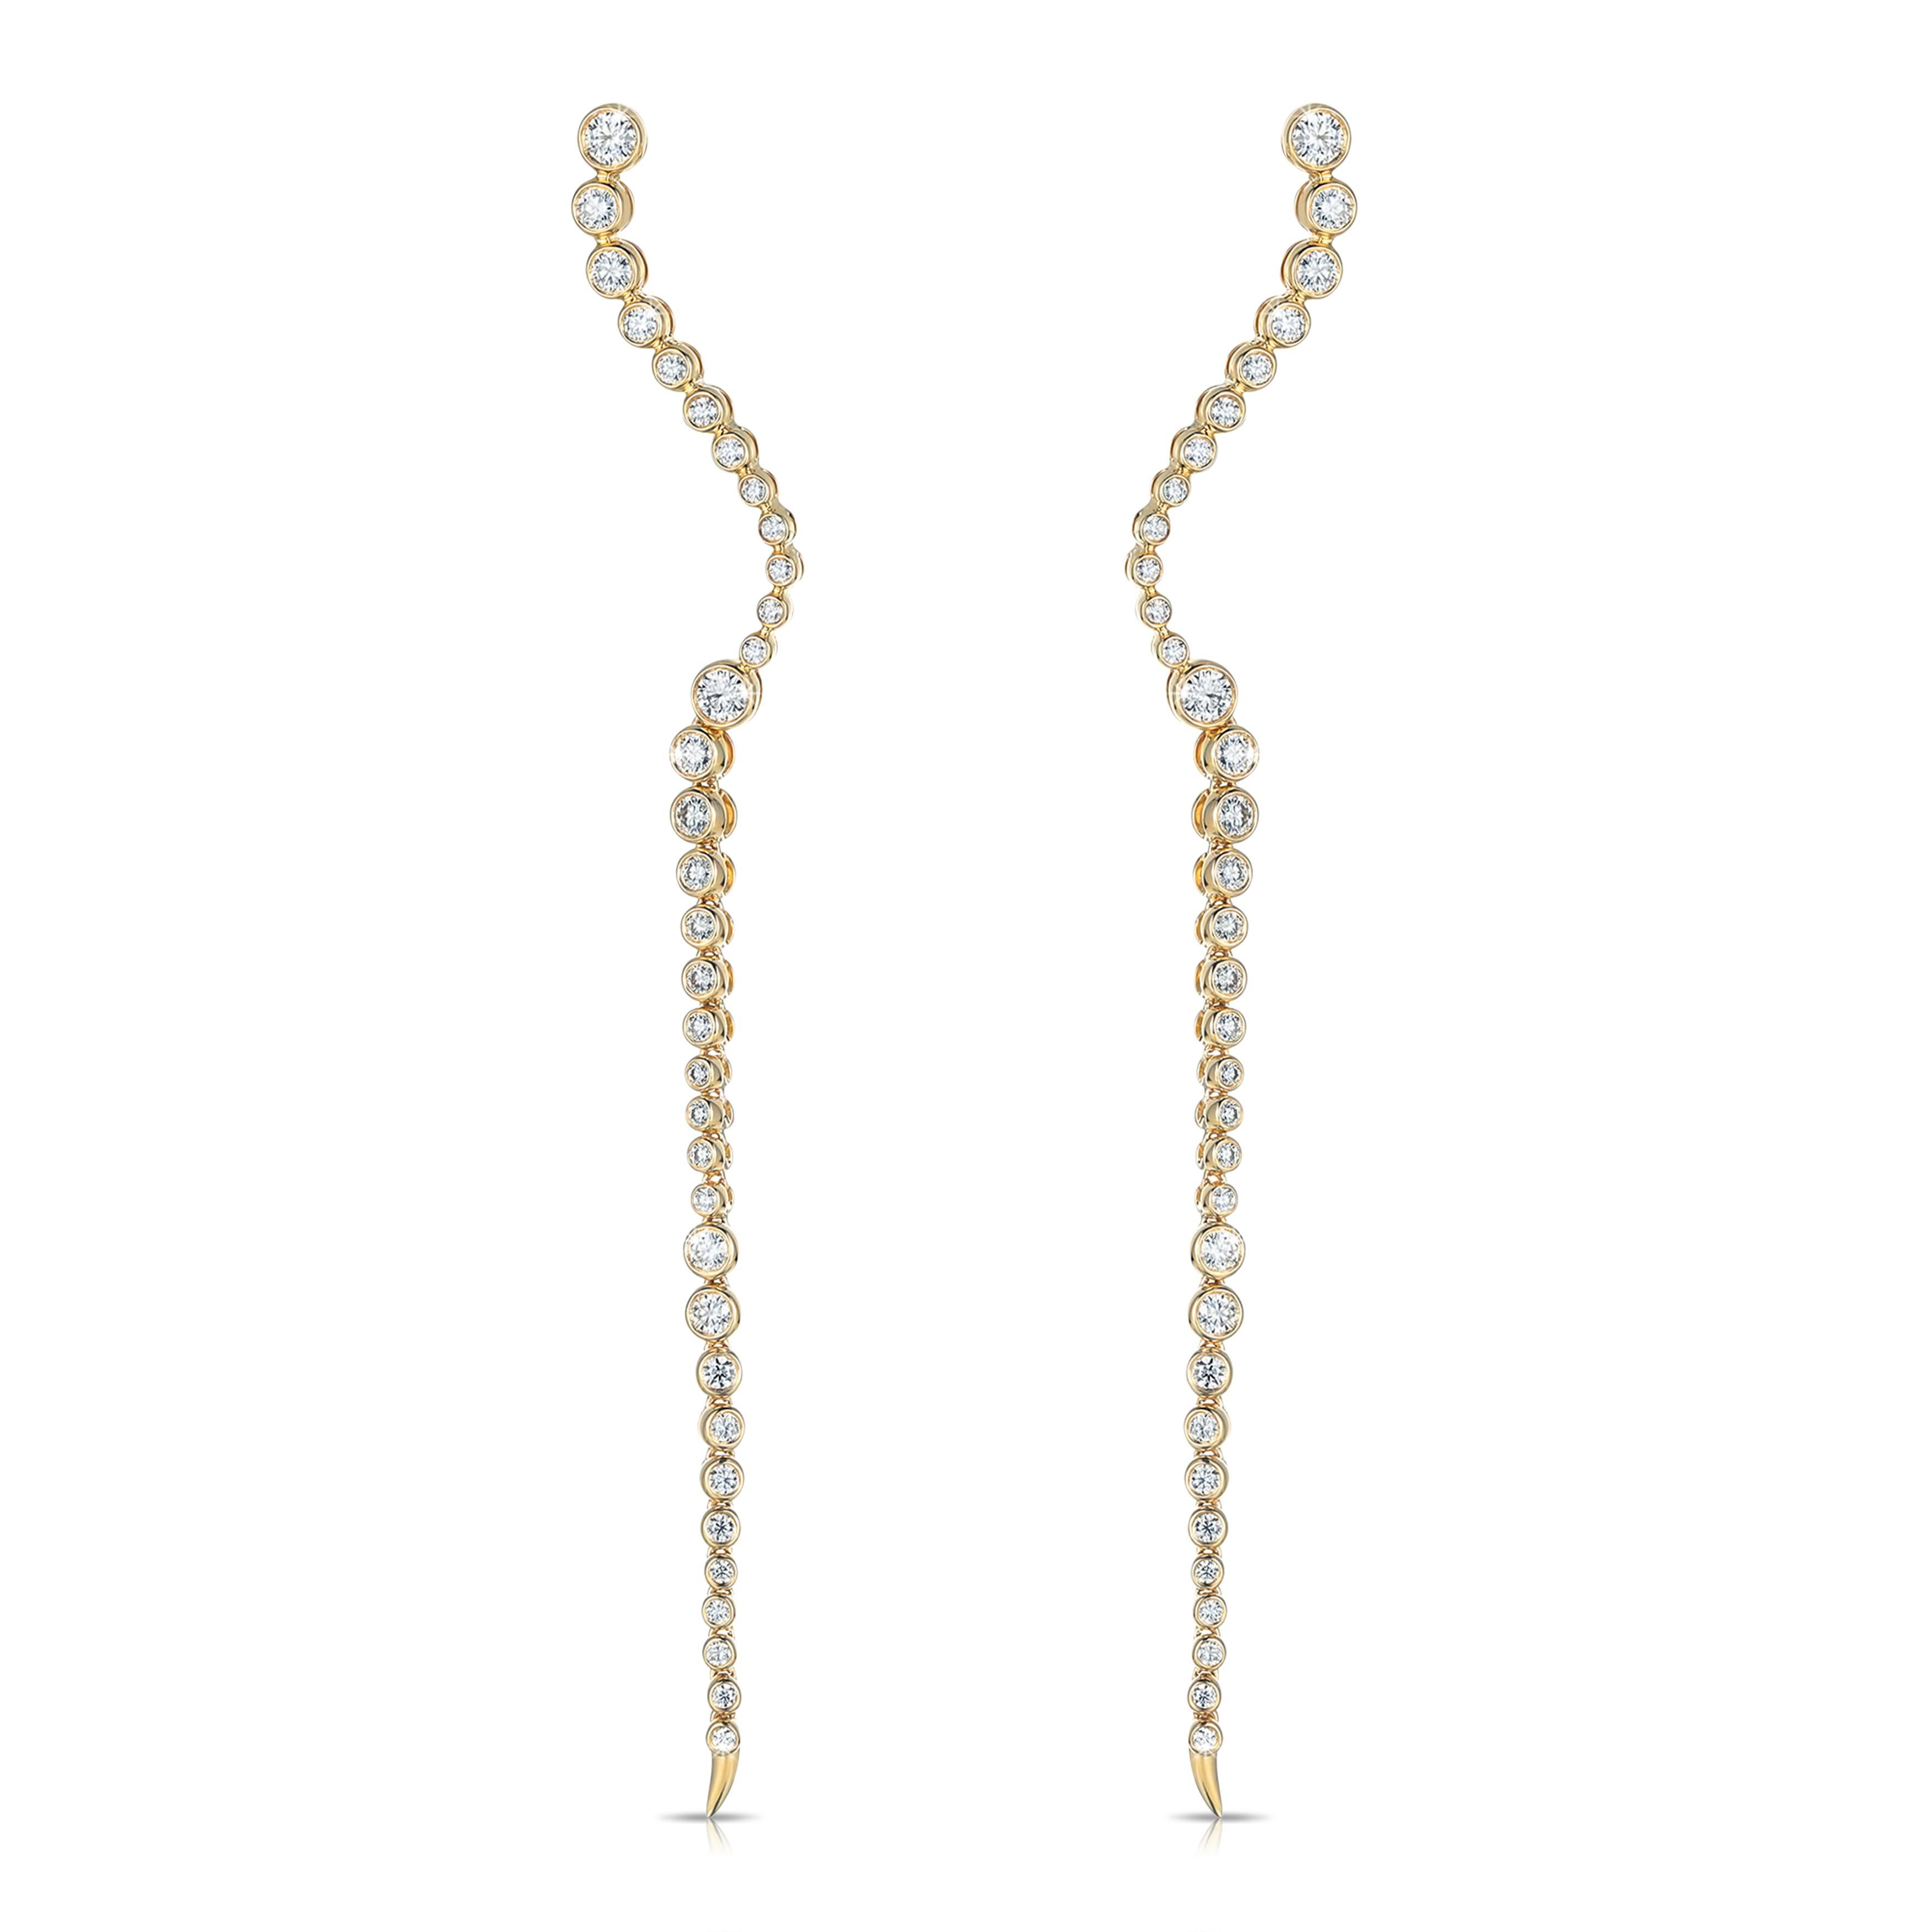 Earrings Information
Diamond Type : Natural Diamond
Metal : 14k Gold
Metal Color : Yellow Gold
Stone Type : Round Diamond
Length : 1.3mm/1.5mm/1.6mm/1.8mm/2.2mm
 

These gold-filled ear threads, also known as threader earrings, are a fun alternative